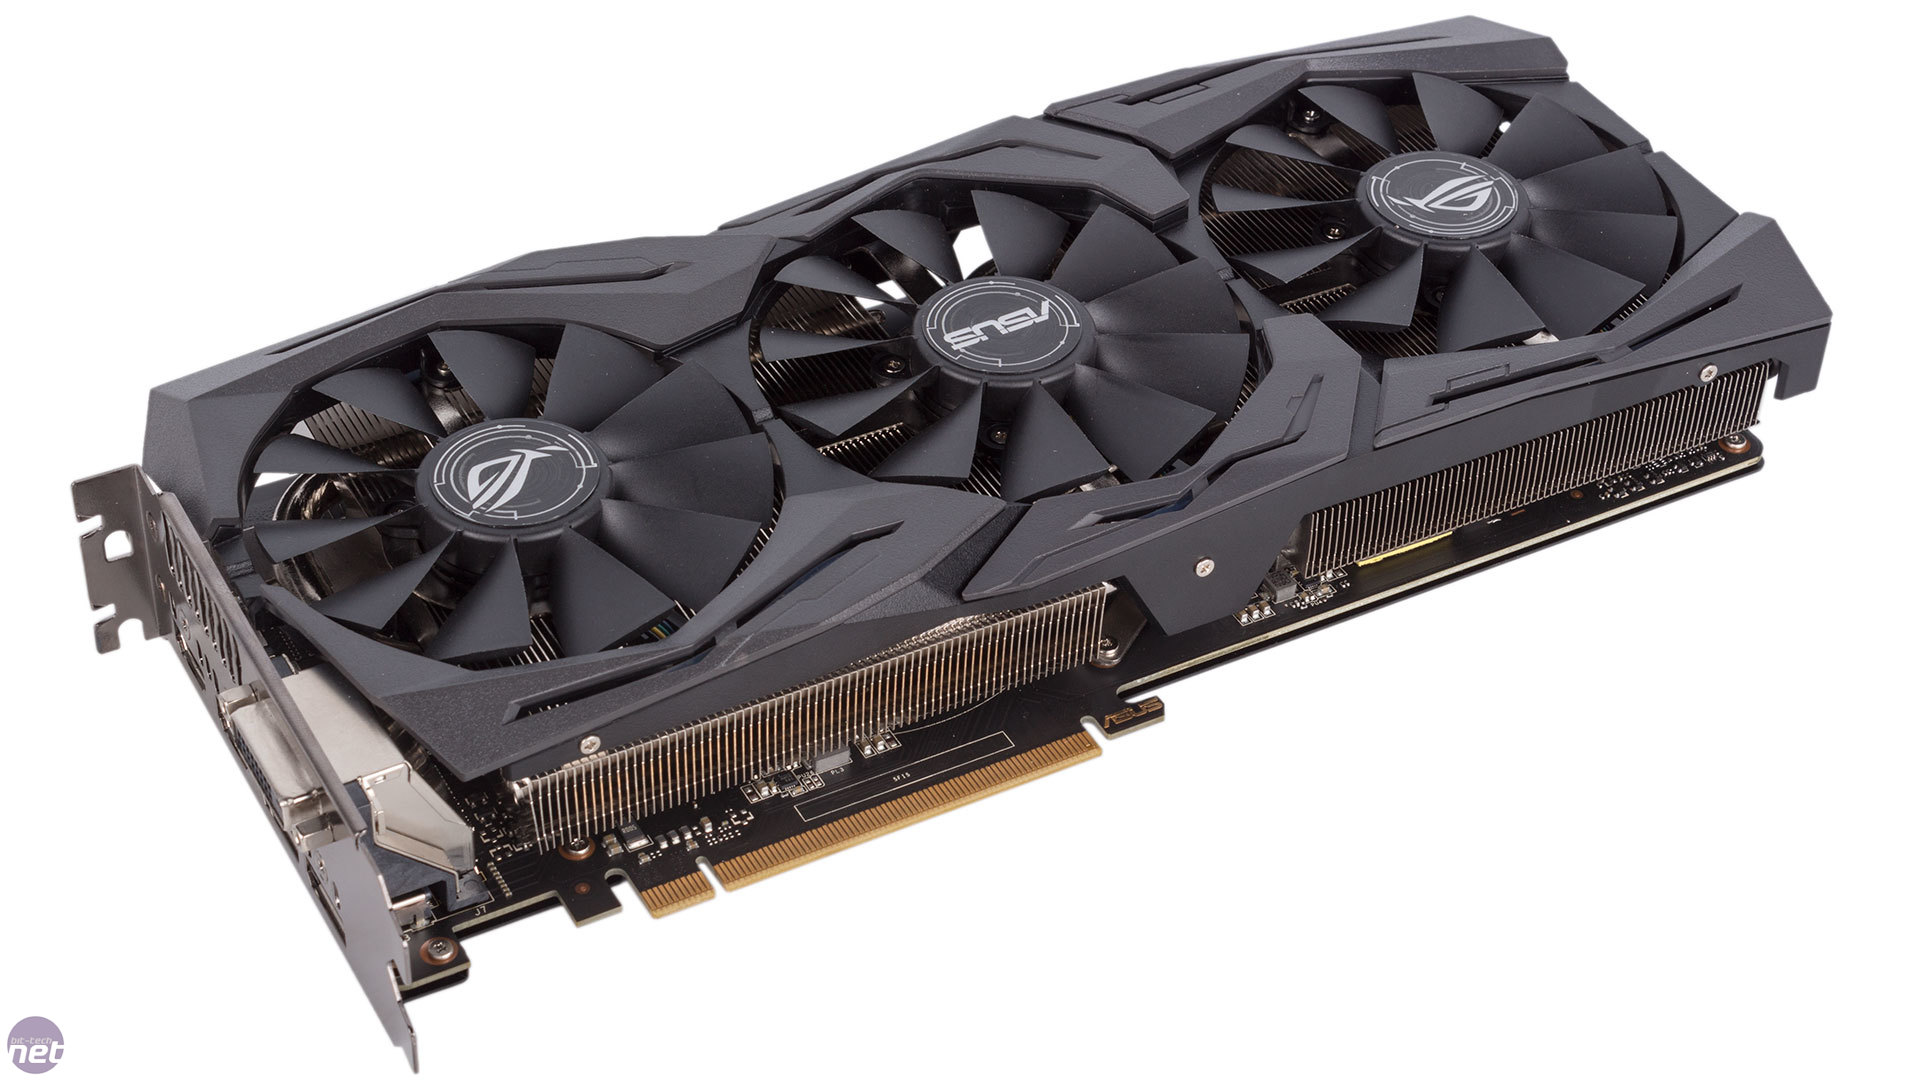 The GeForce GTX 1060 Founders Edition & ASUS Strix GTX 1060 Review